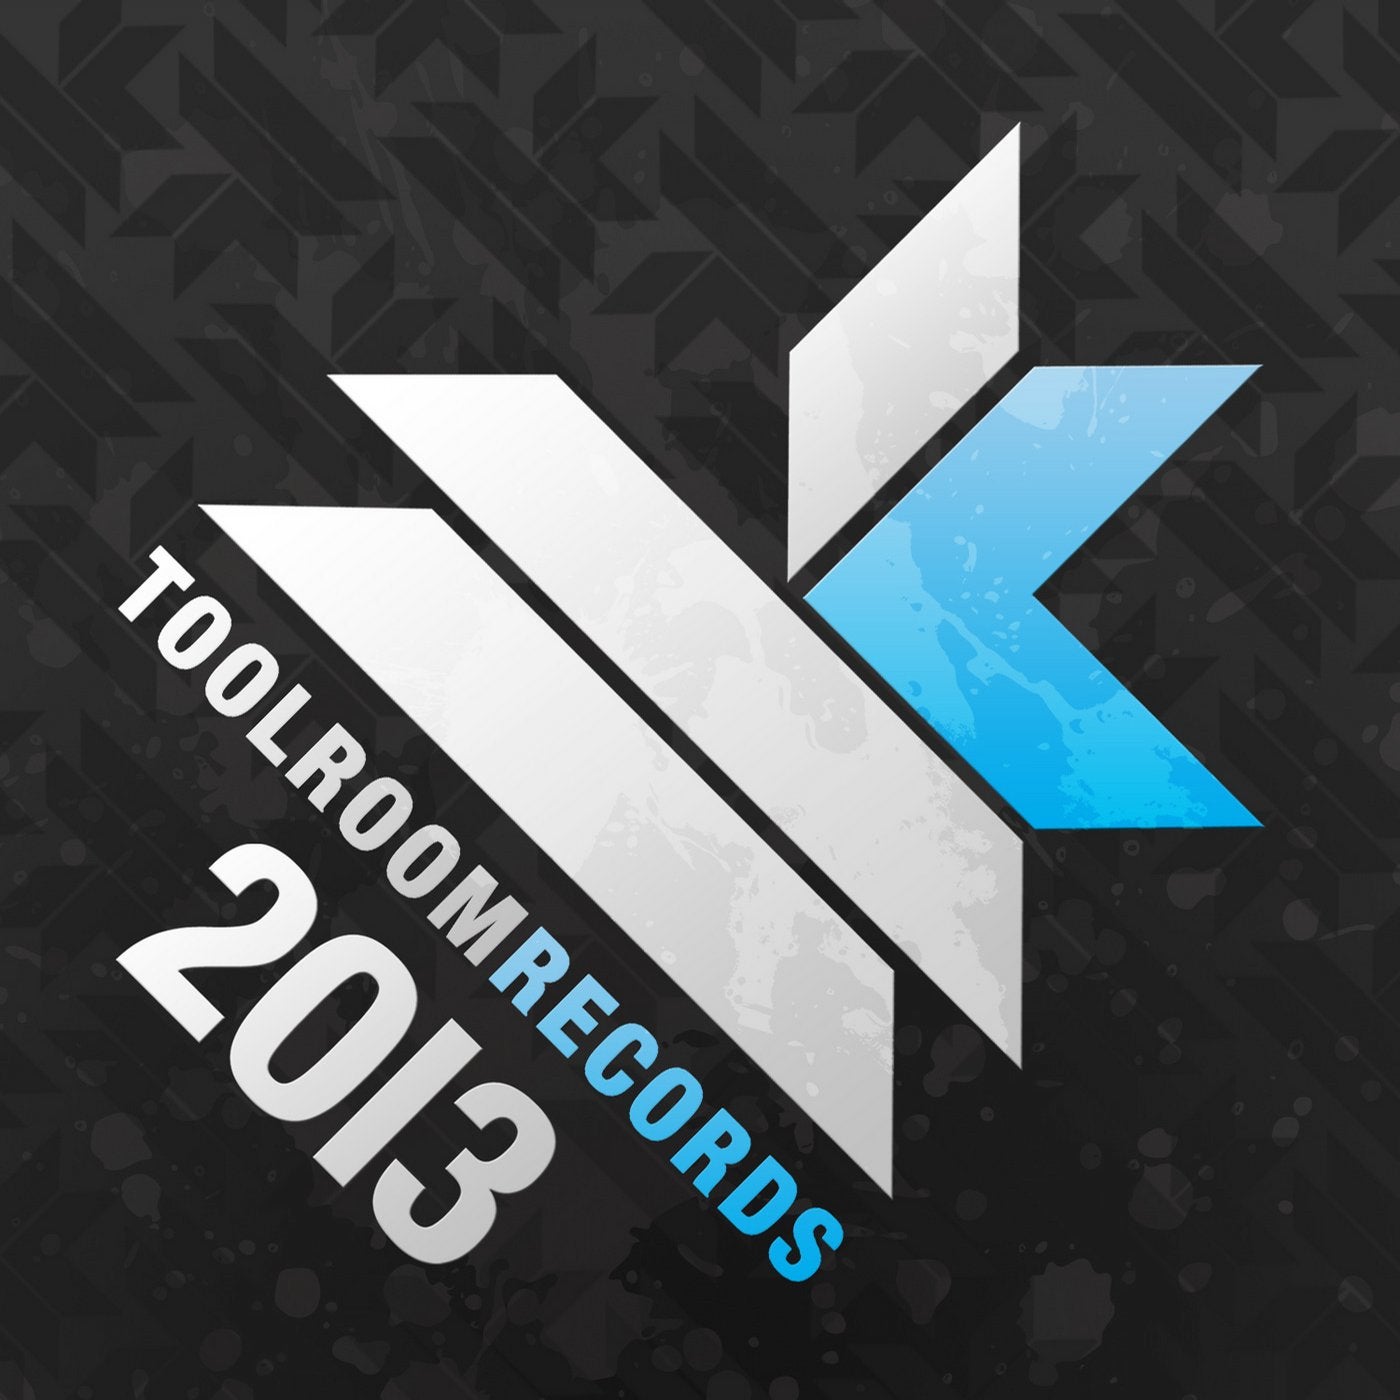 Best Of Toolroom Records 2013